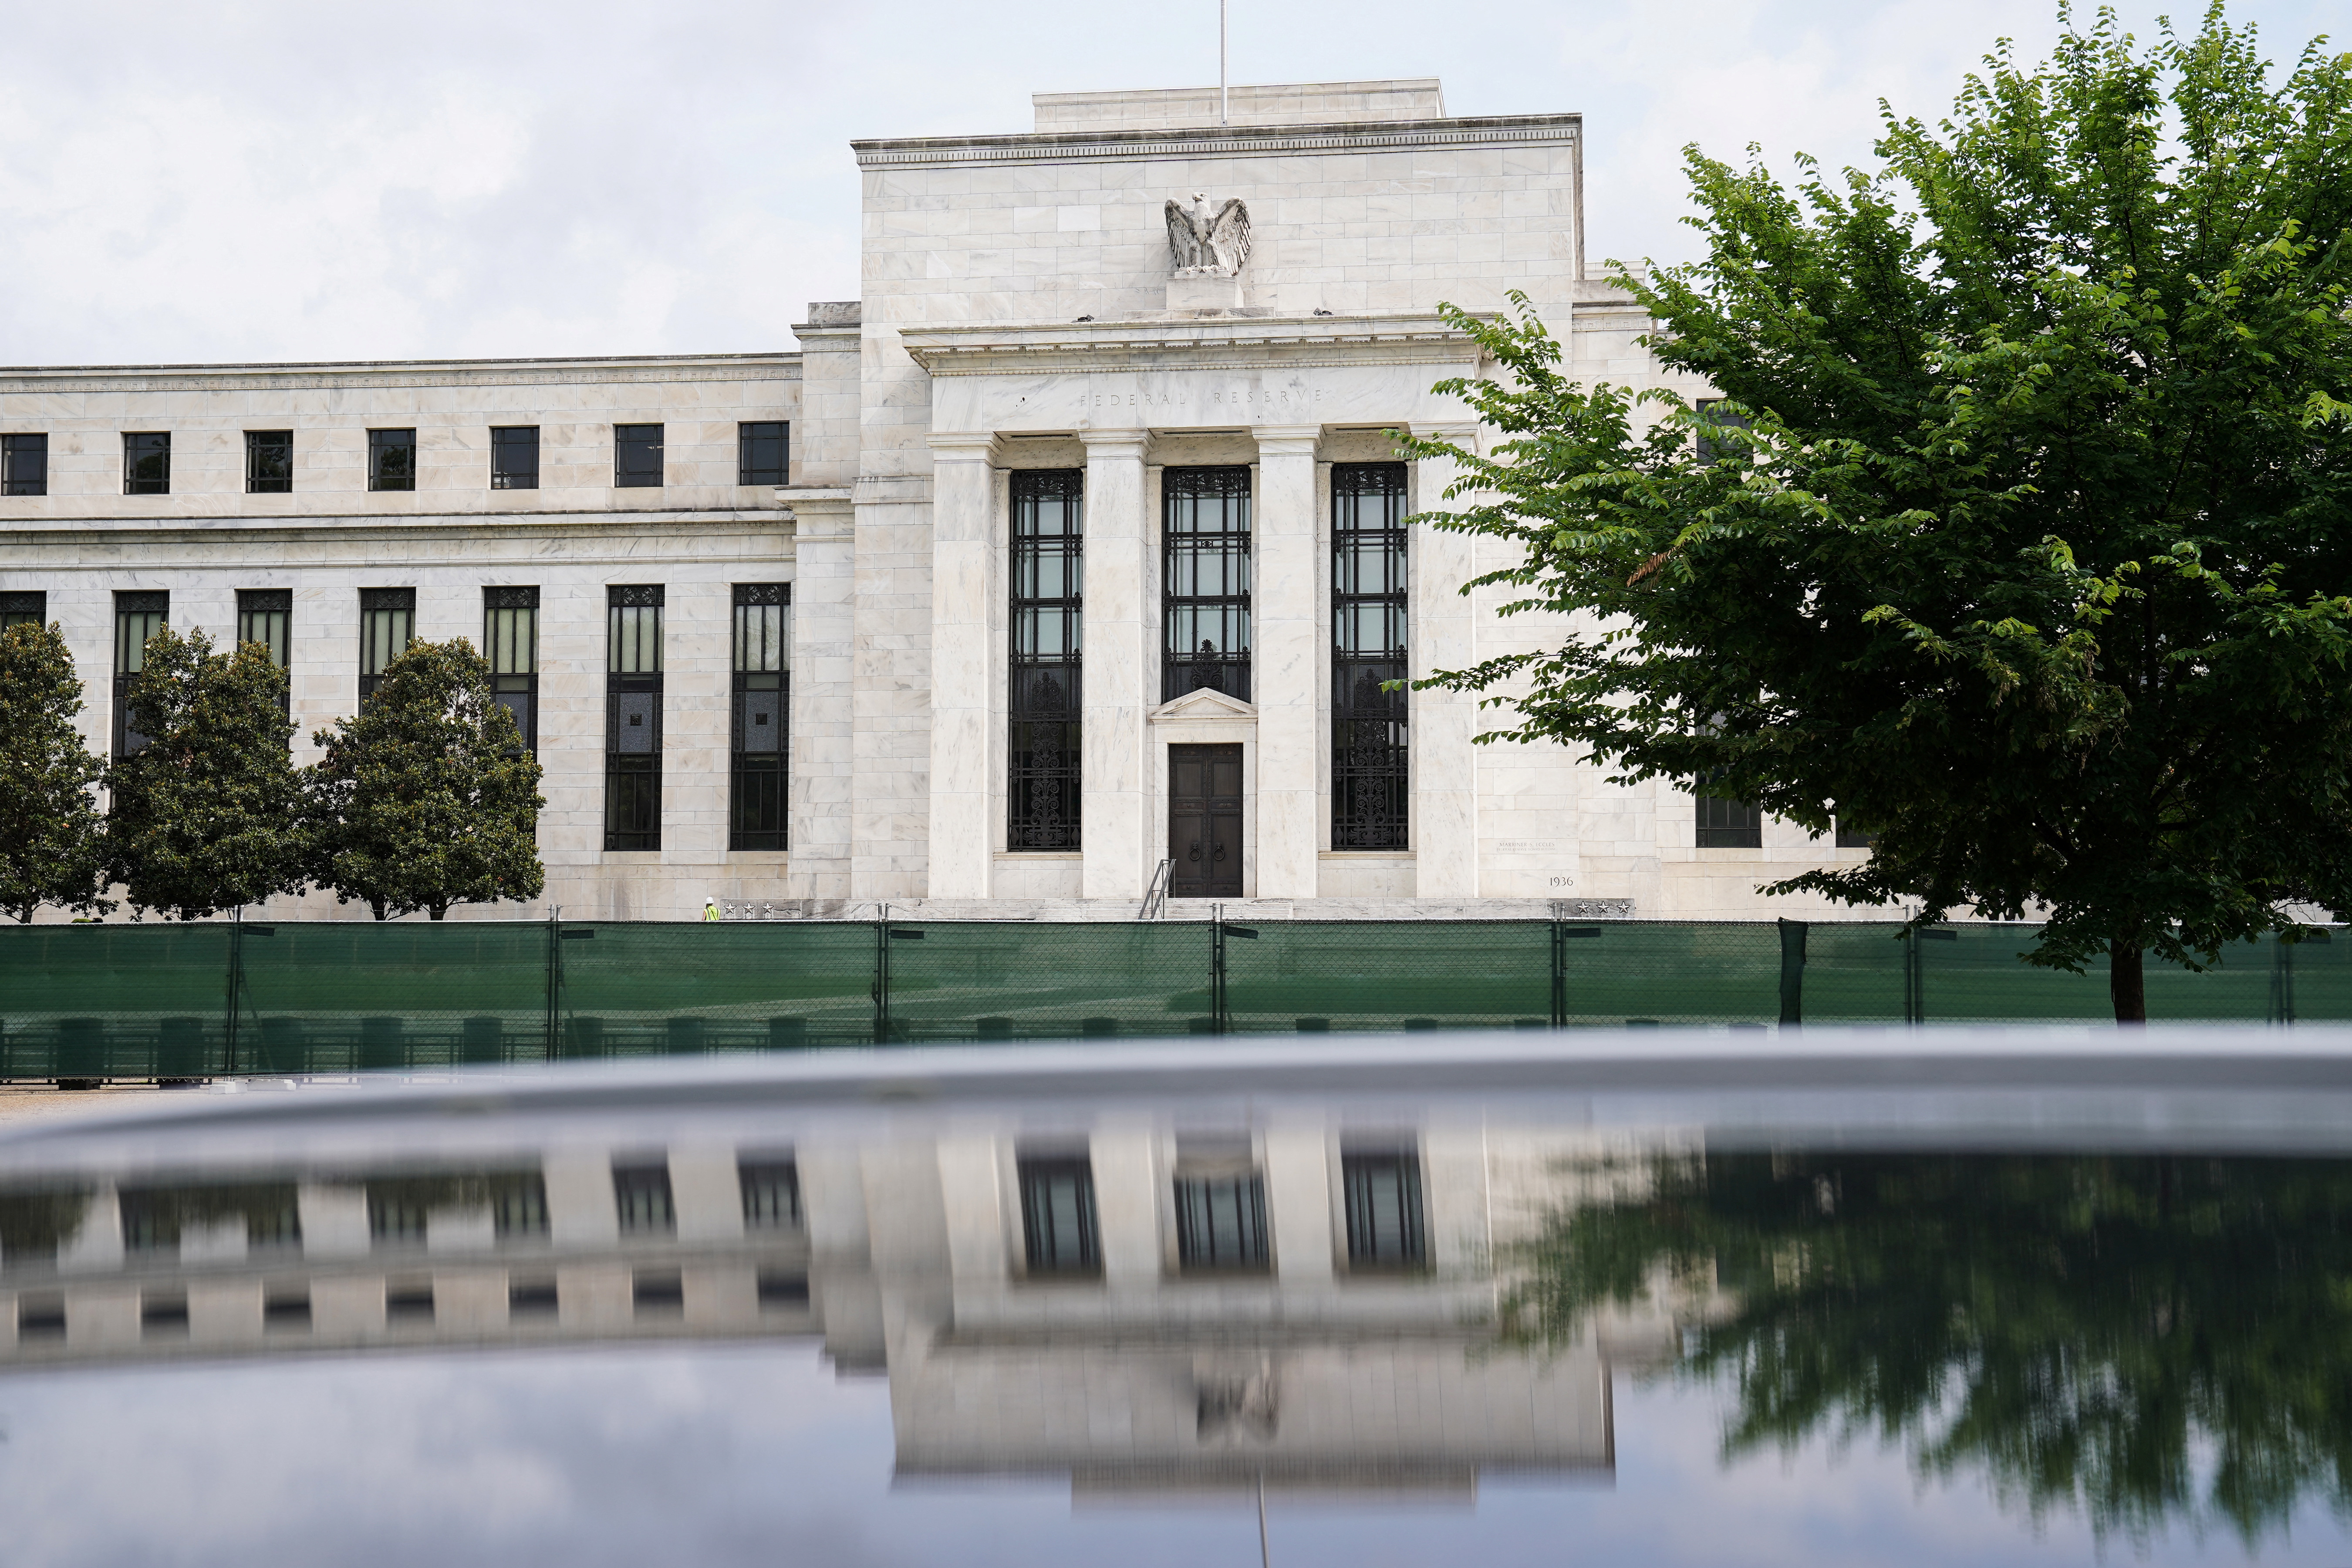 The exterior of the Marriner S. Eccles Federal Reserve Board Building is seen in Washington, D.C., U.S., June 14, 2022.